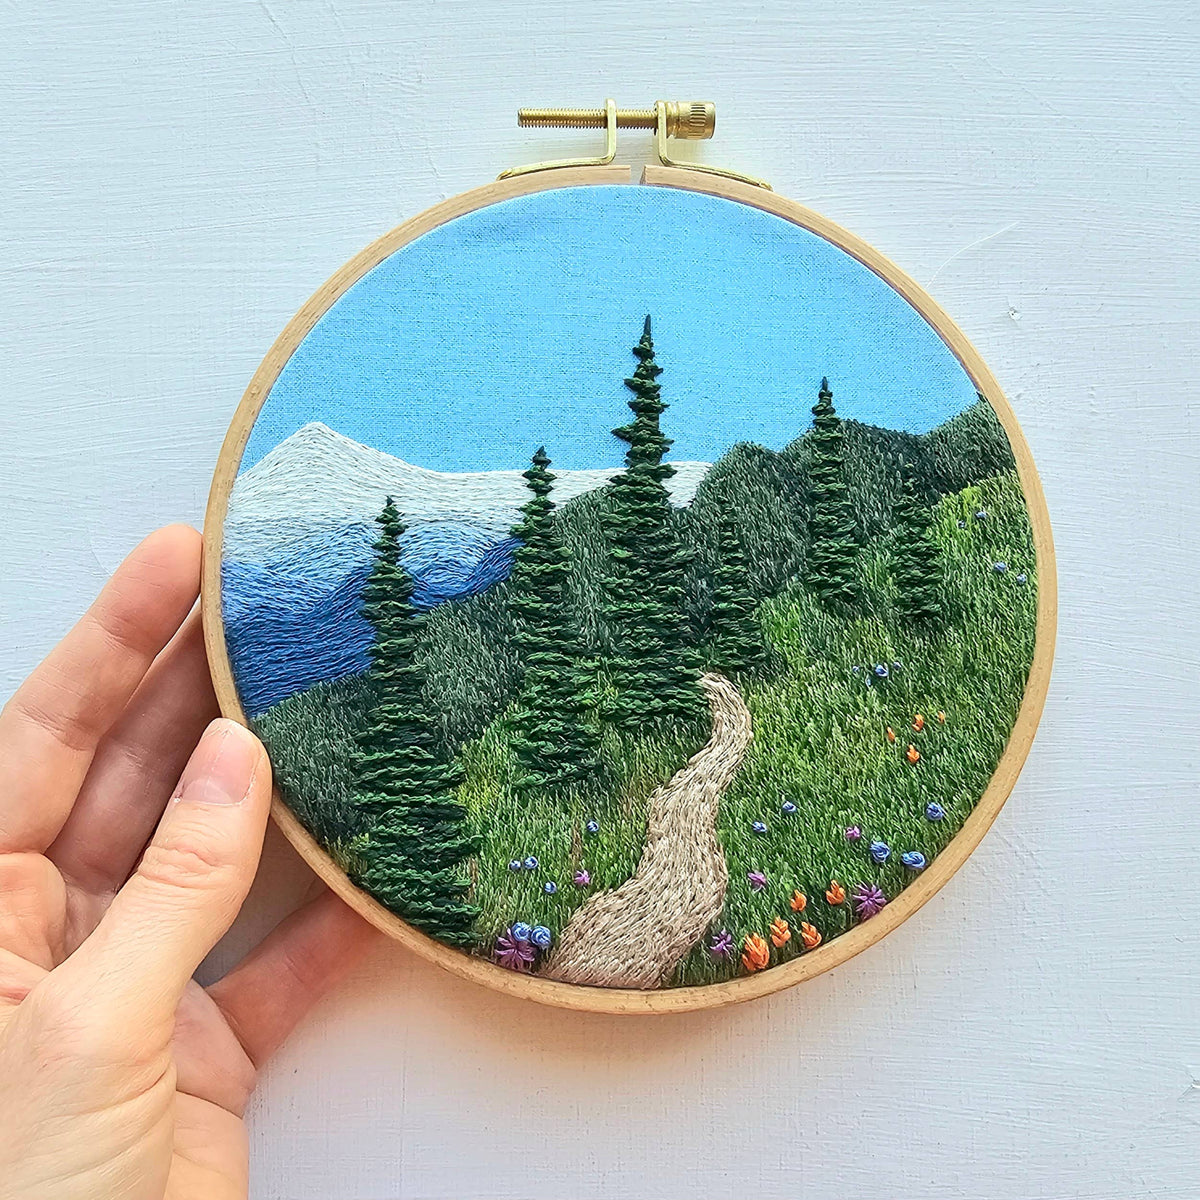 Happy Trails Hand Embroidery Kit